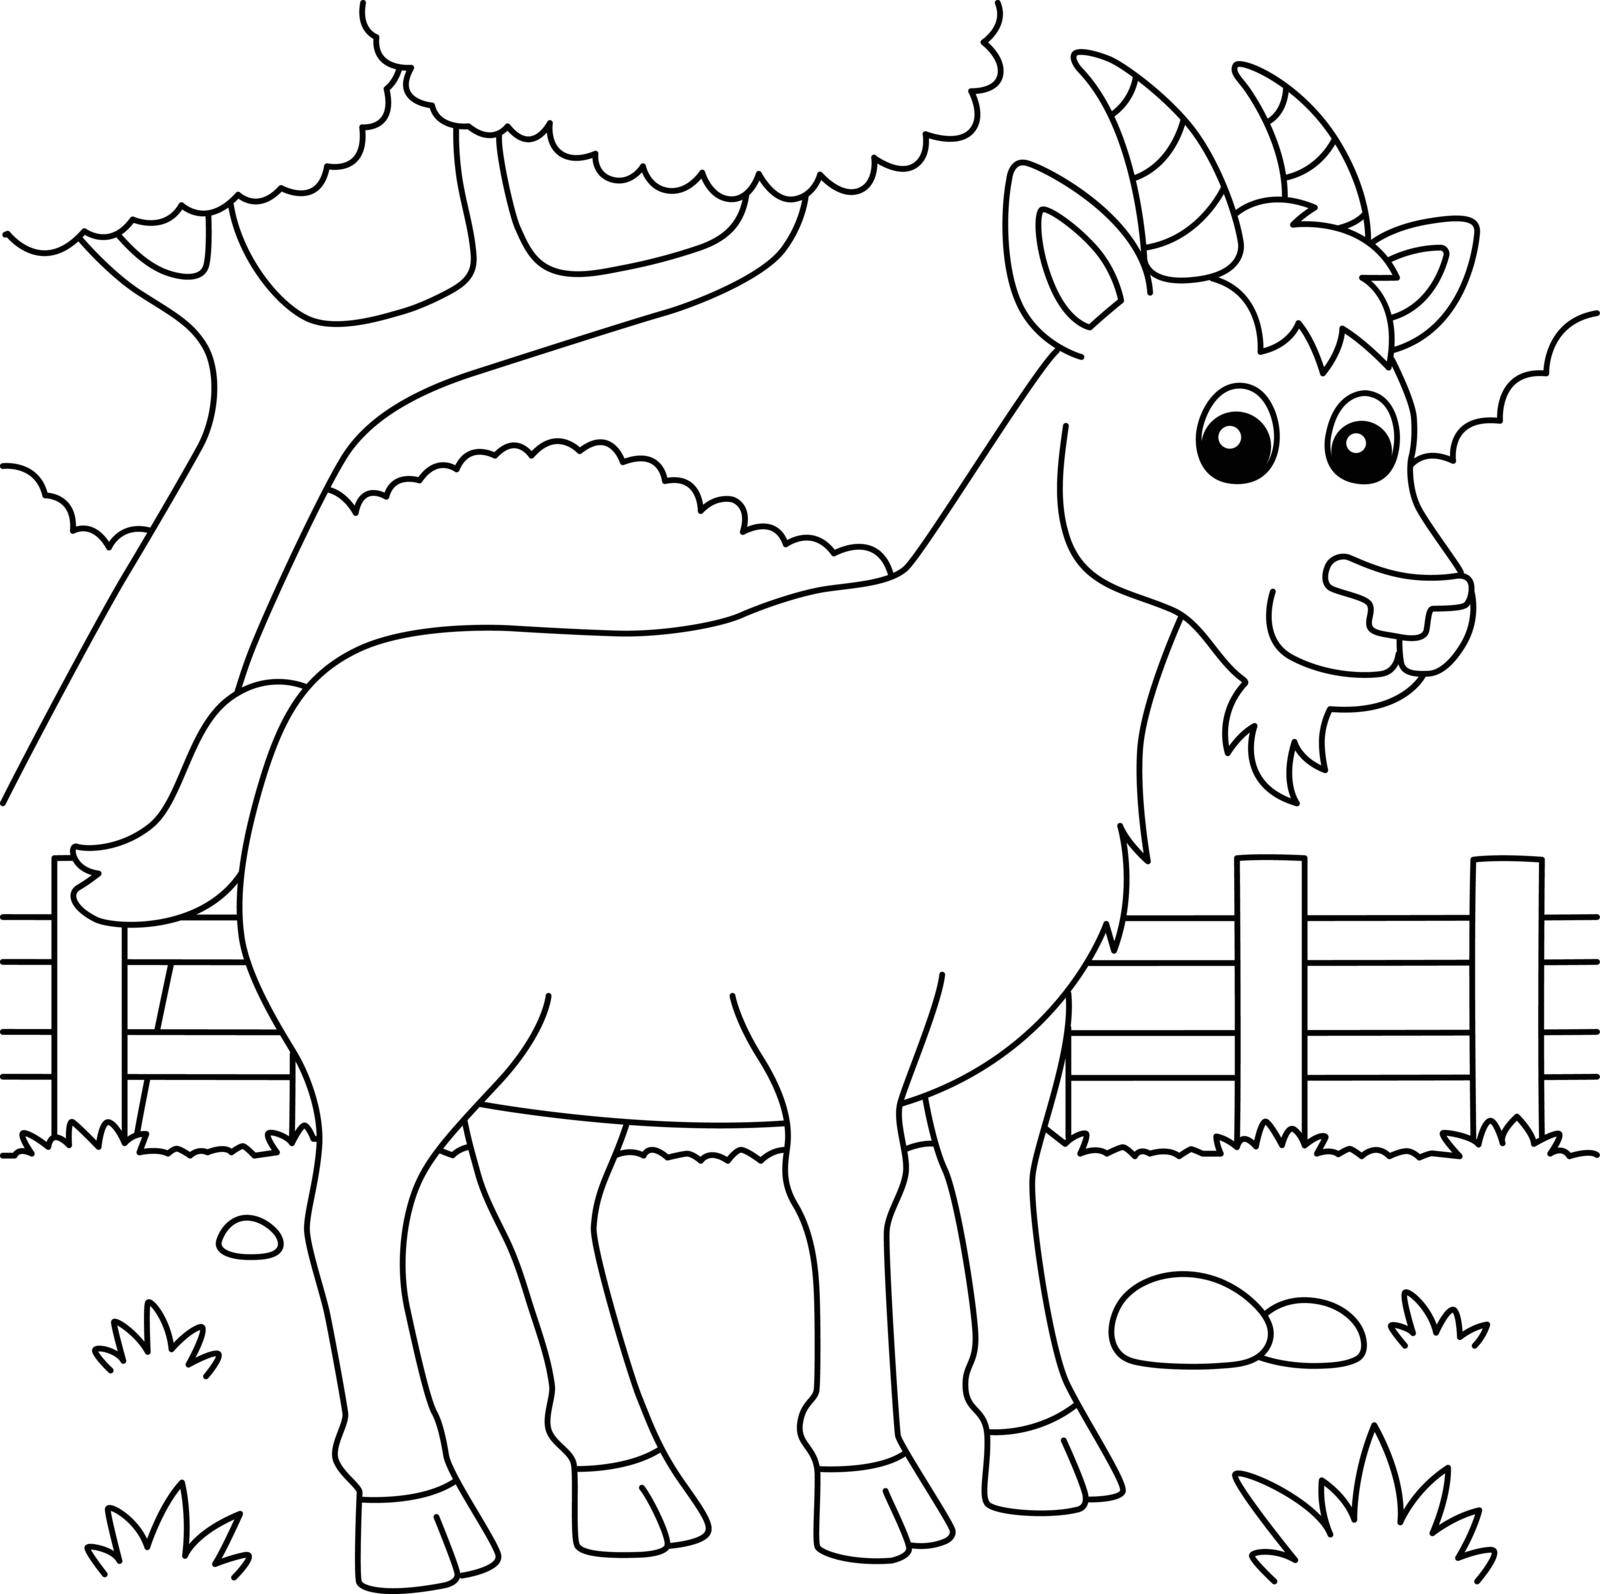 Goat Coloring Page for Kids by abbydesign